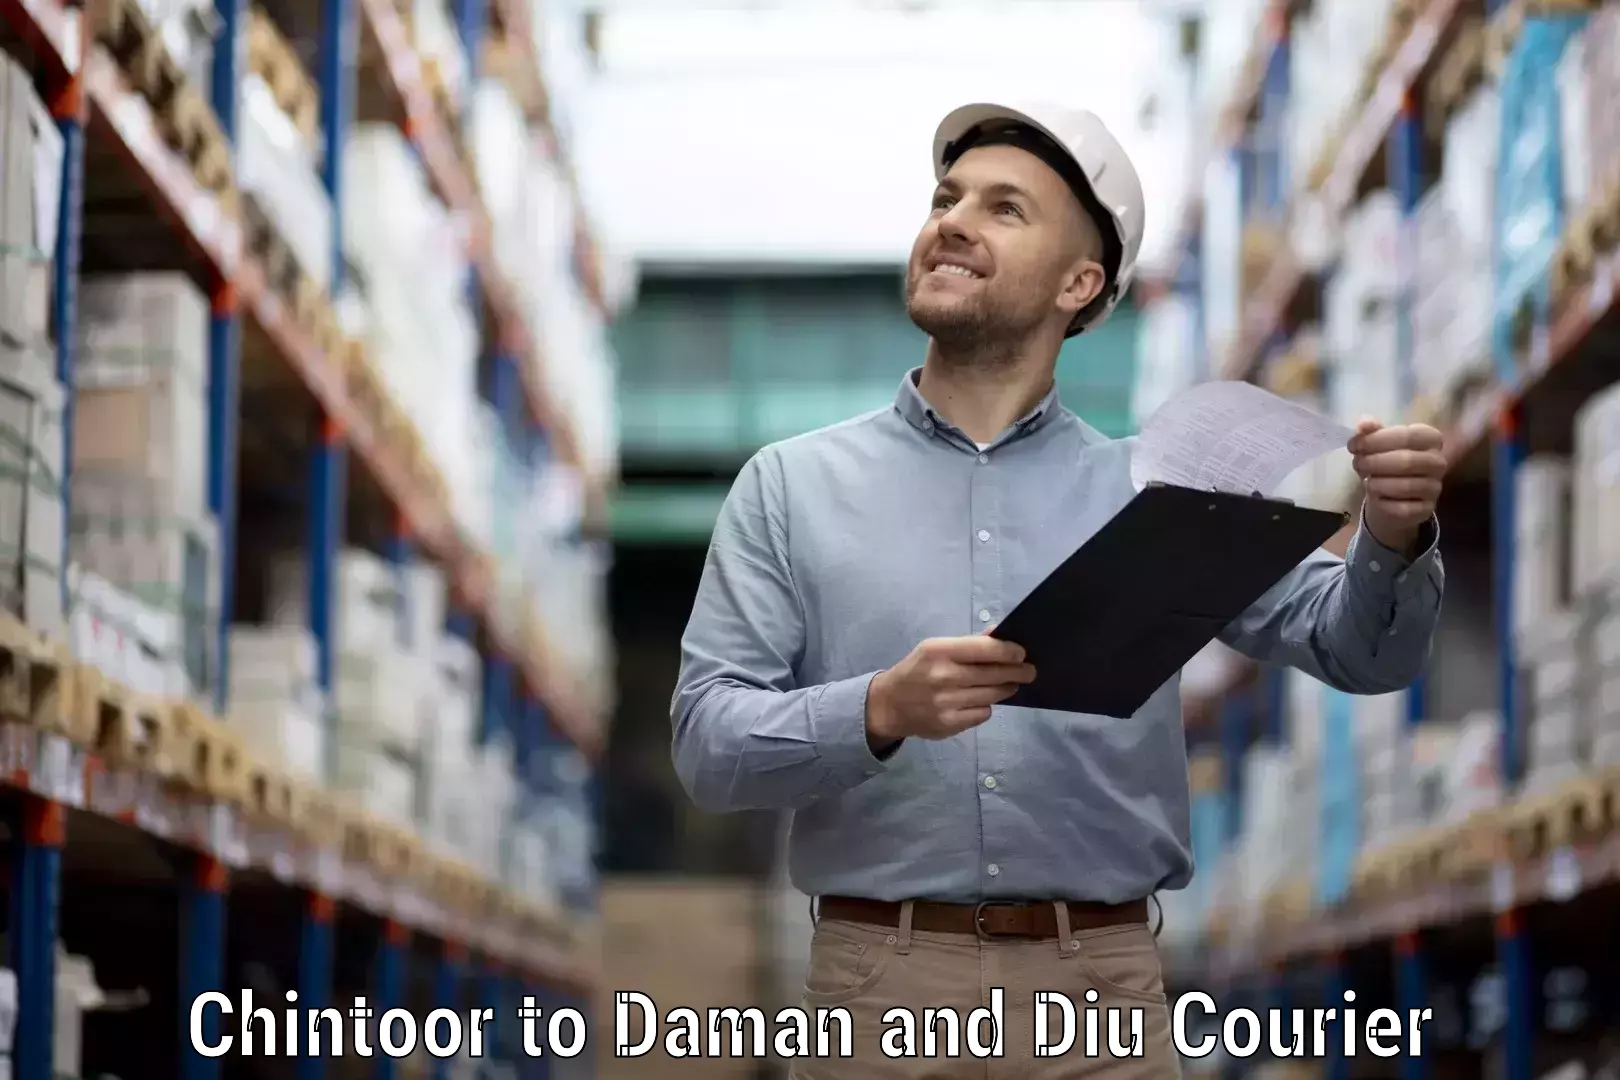 Courier service partnerships Chintoor to Daman